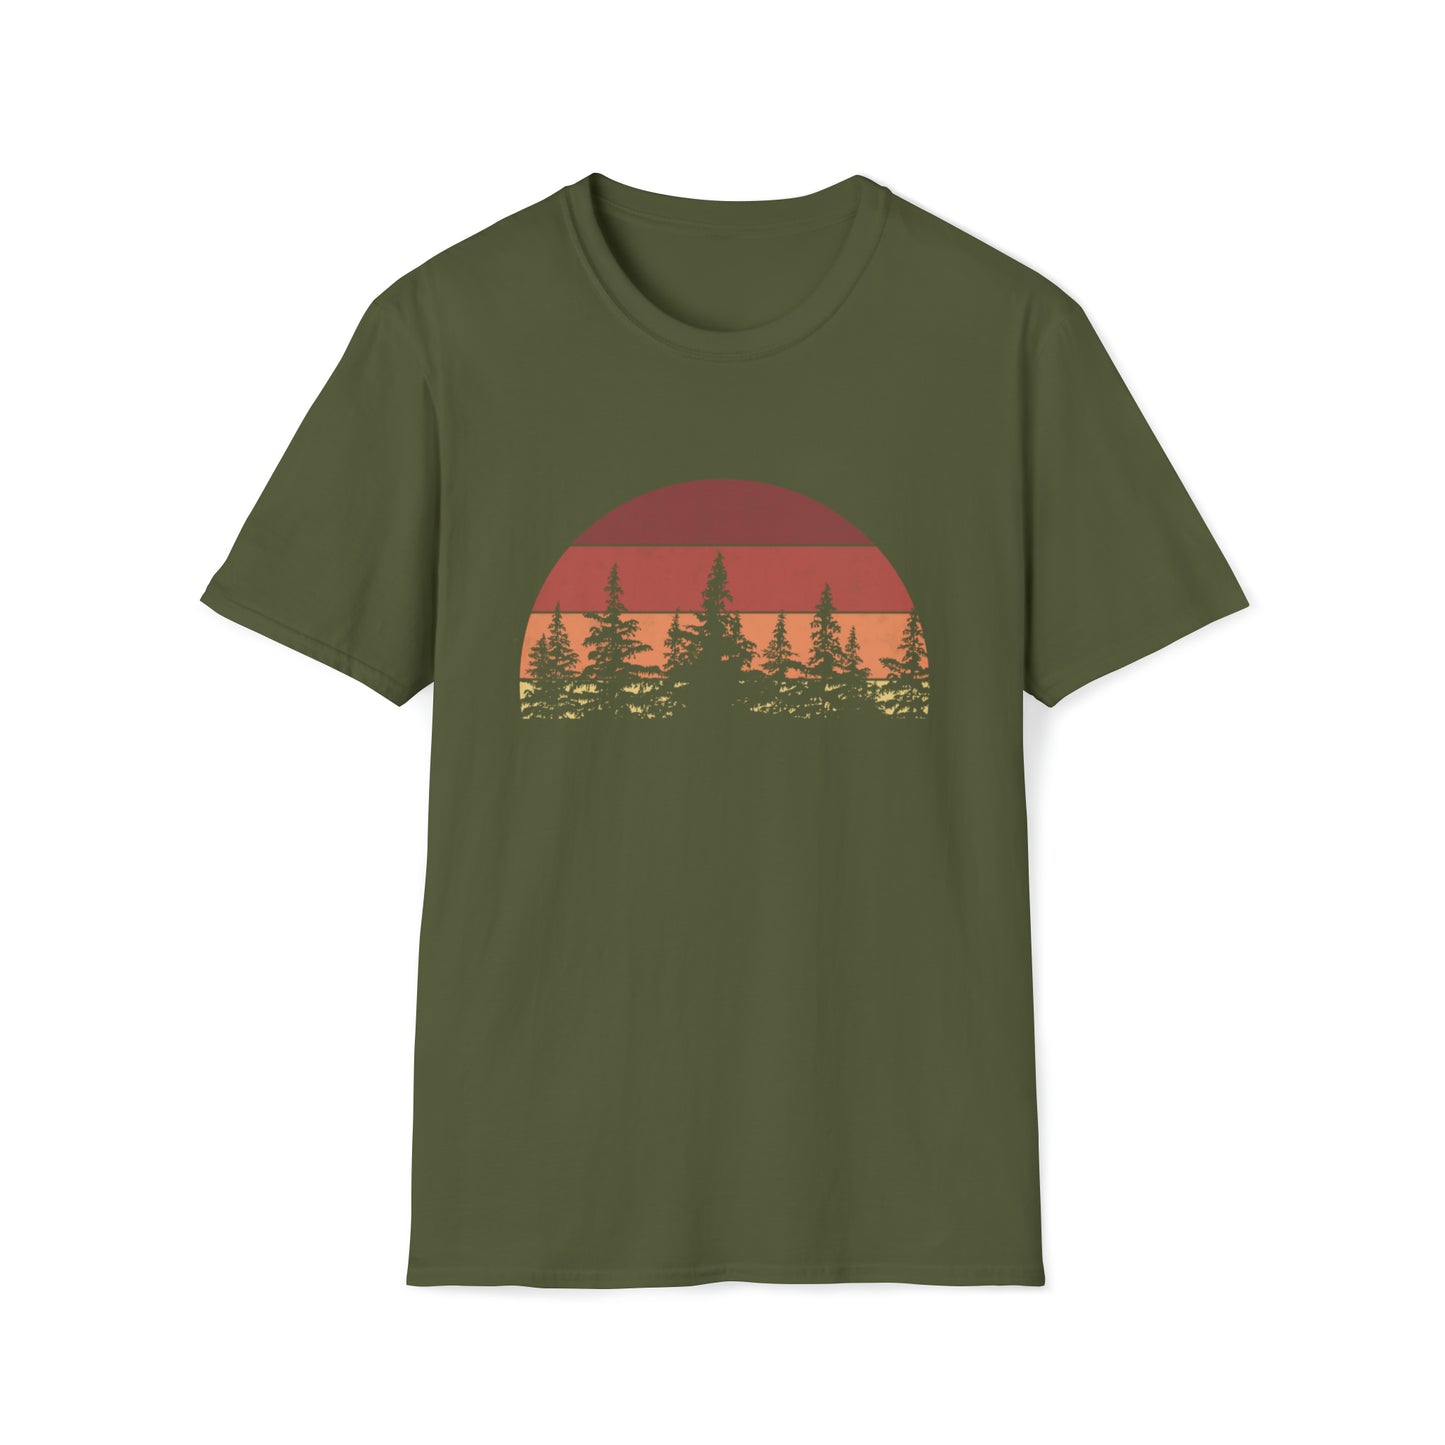 Softstyle T-Shirt, I'd Rather Be Camping, Retro Sunset Trees